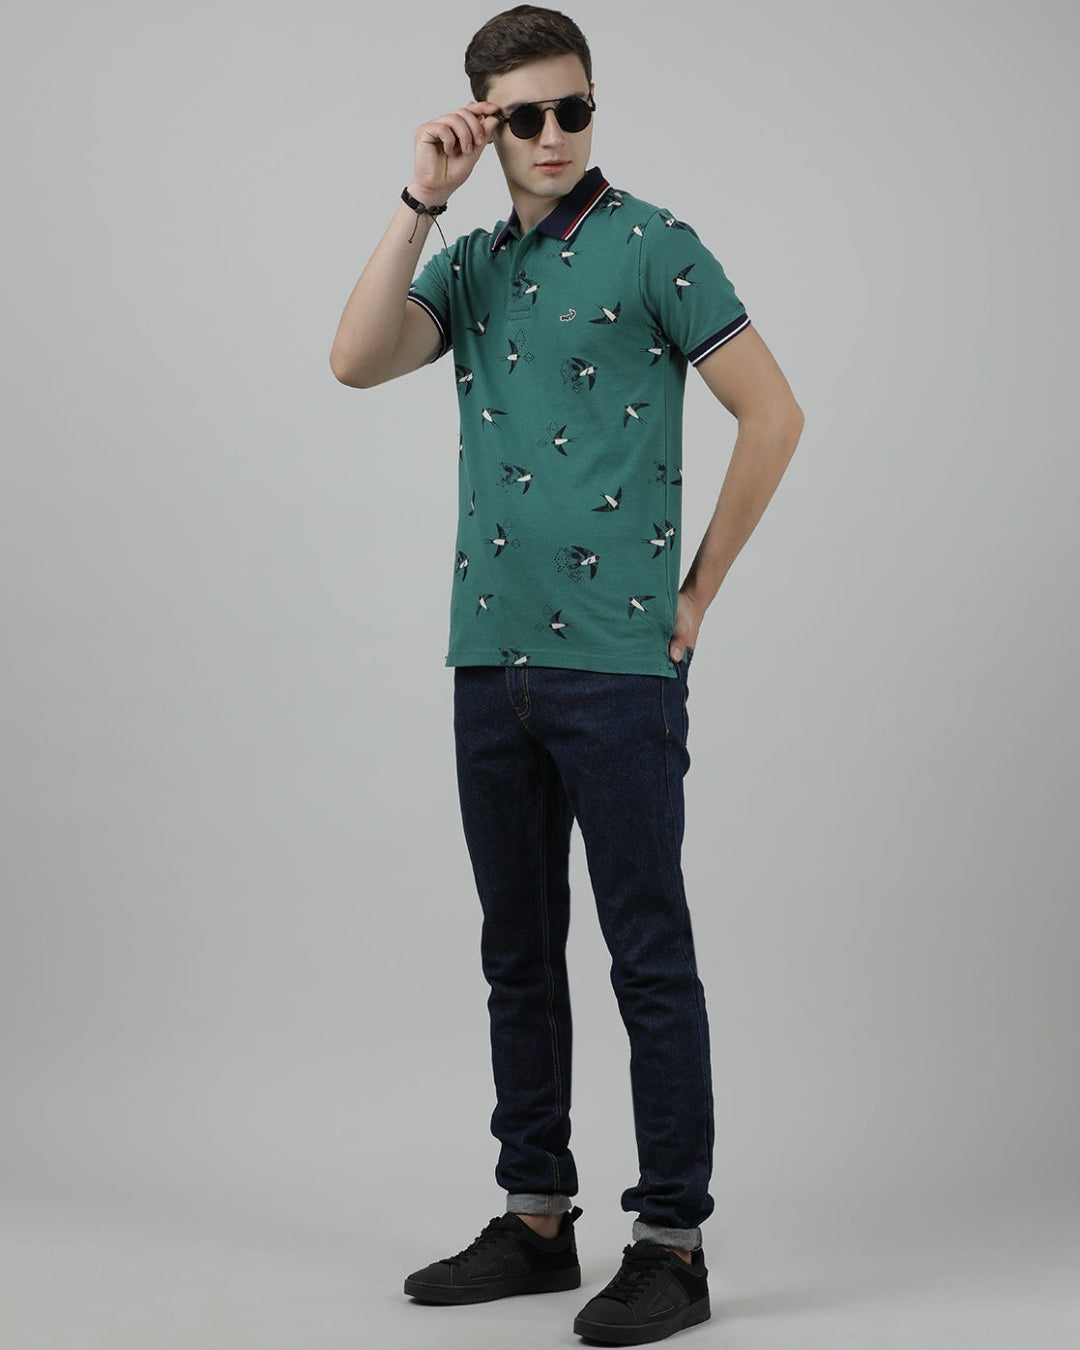 Crocodile Casual Green T-Shirt Polo Printed Half Sleeve Slim Fit with Collar for Men